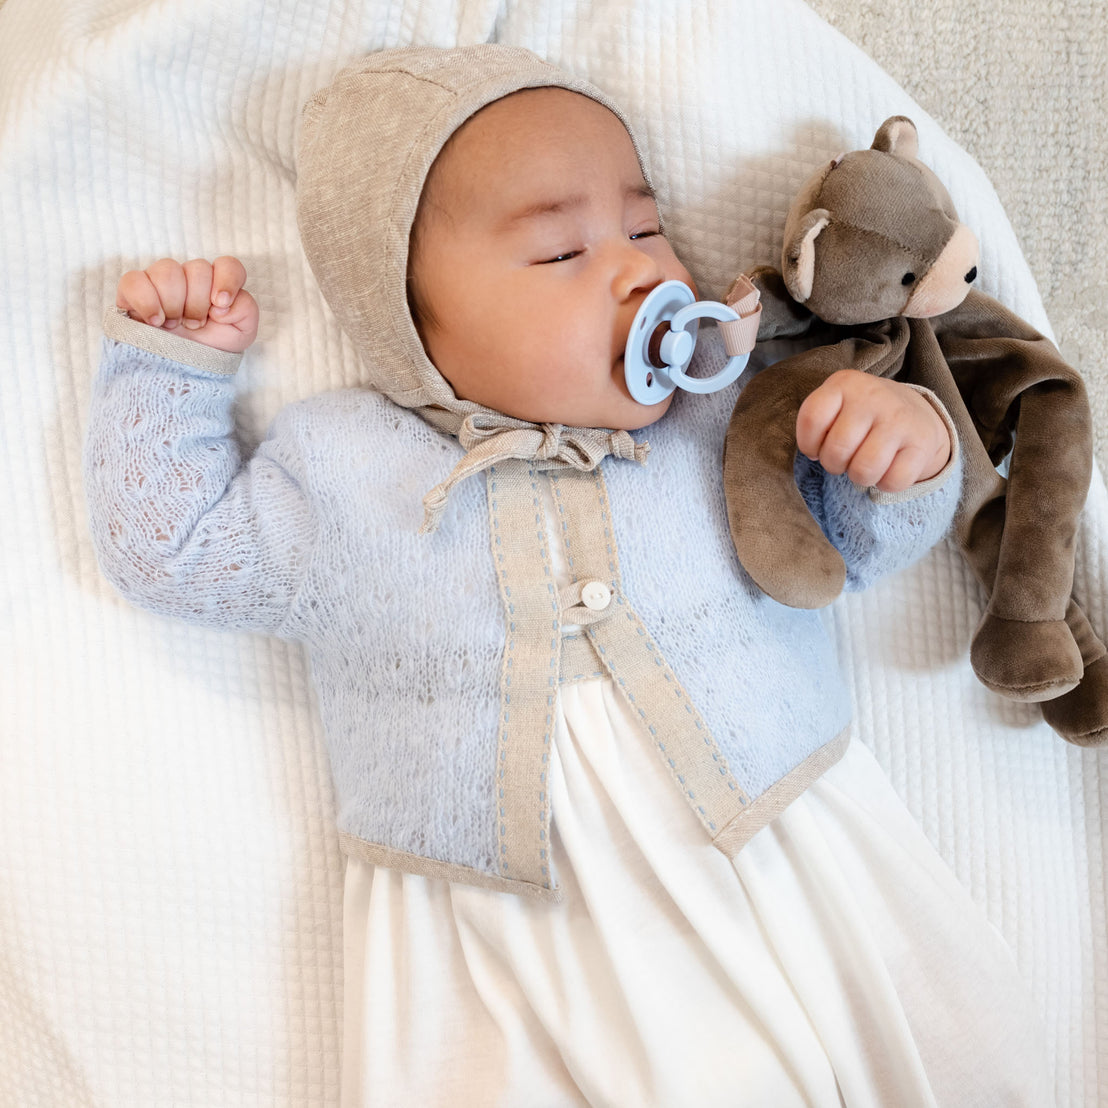 A baby wearing an Austin Sweater lies asleep on a white blanket, holding a plush bear and a pacifier in its mouth.